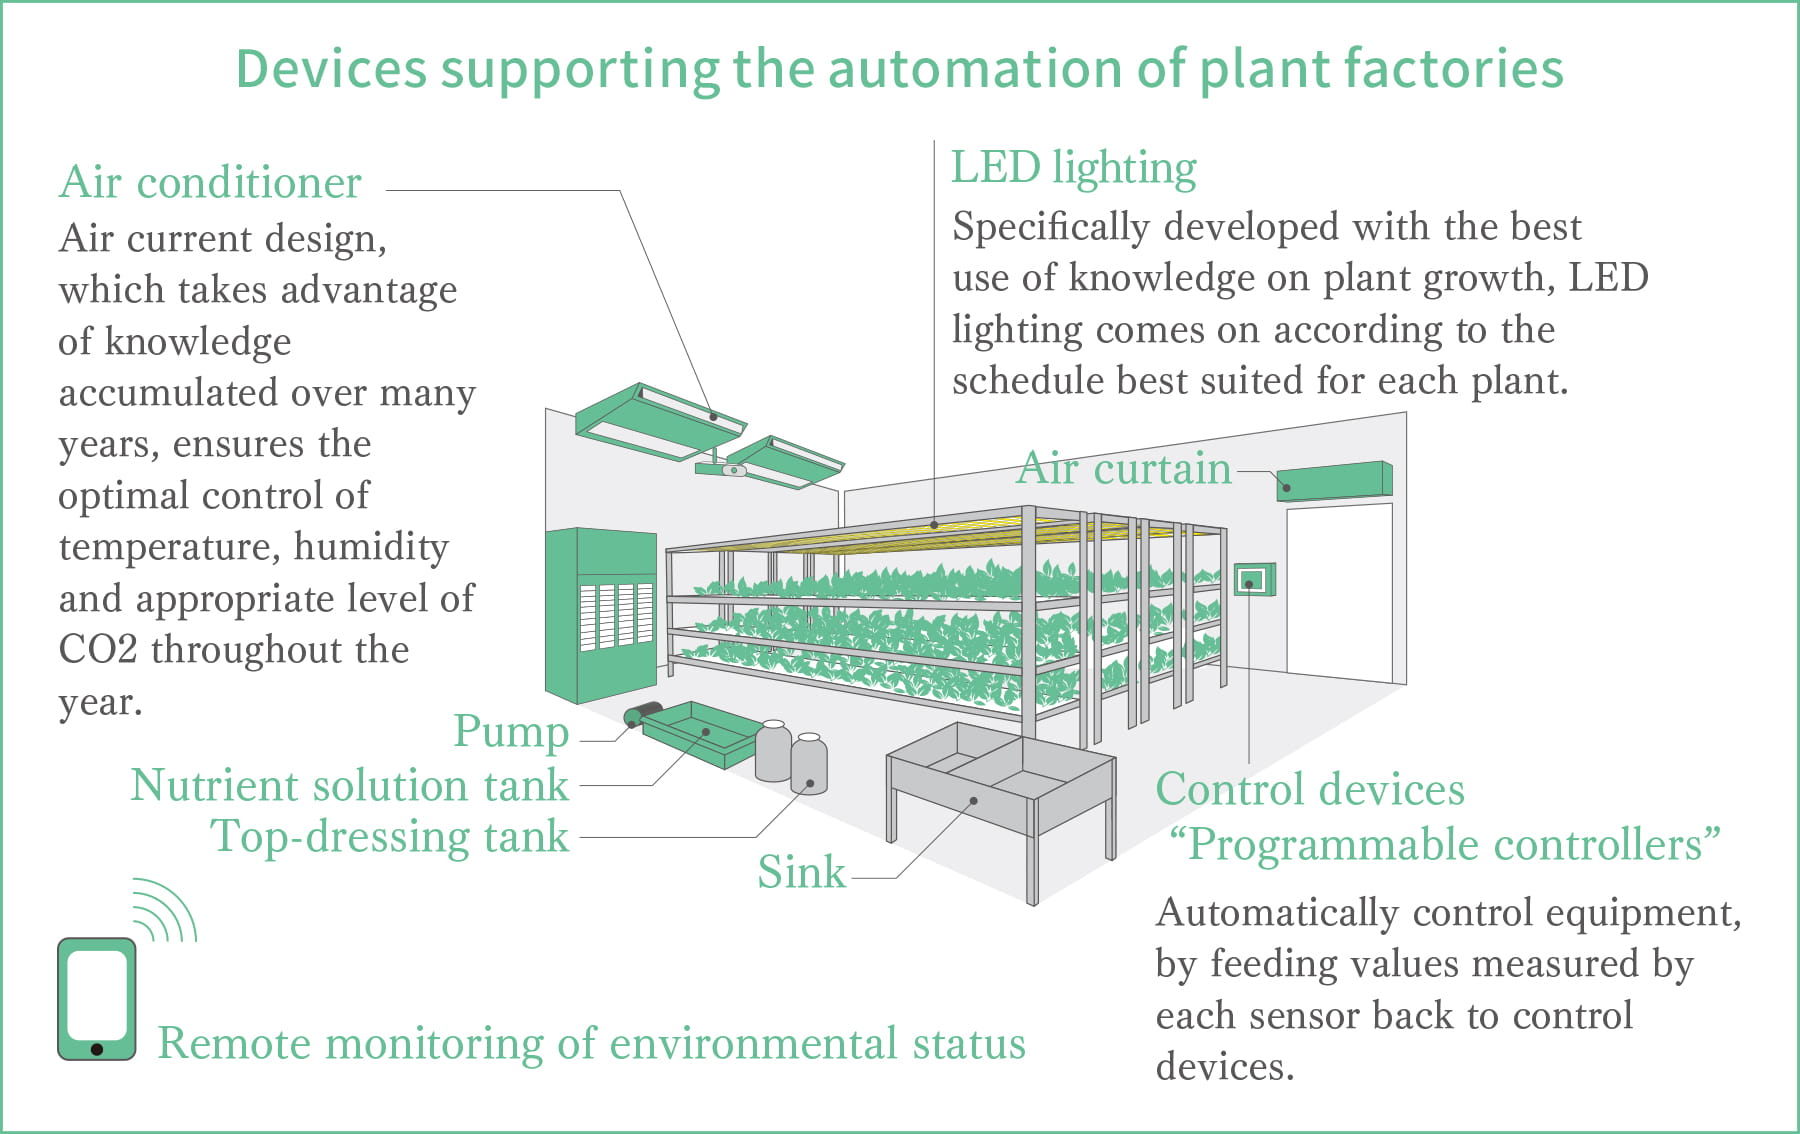 Devices supporting the automation of plant factories